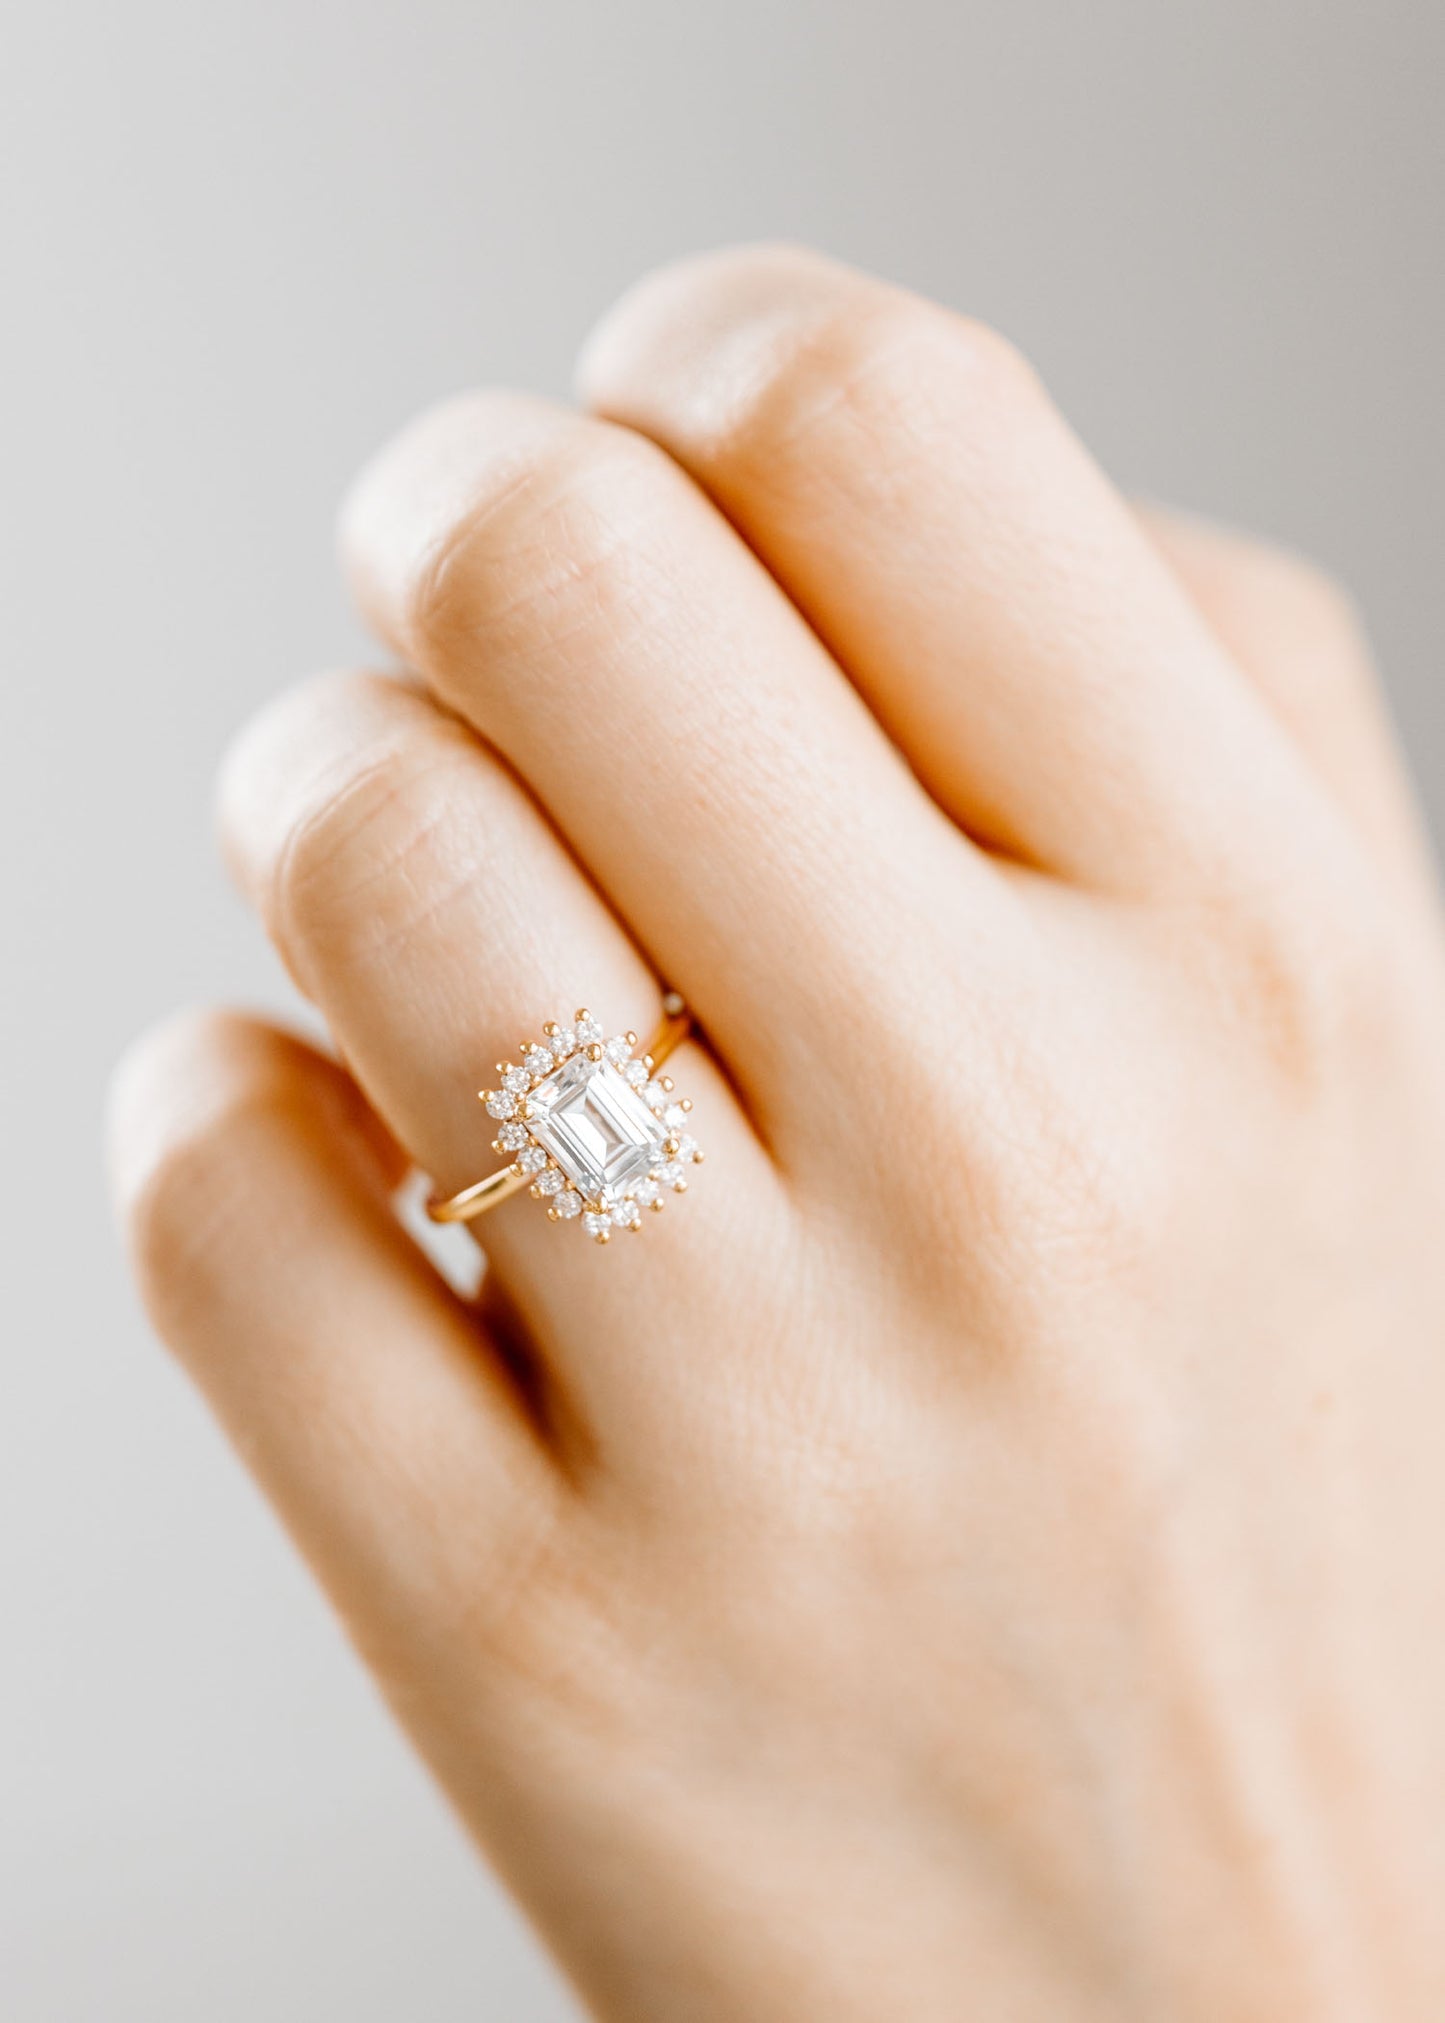 The Soleil Ring | 1.56ct Emerald Cut Moissanite | Rose Gold